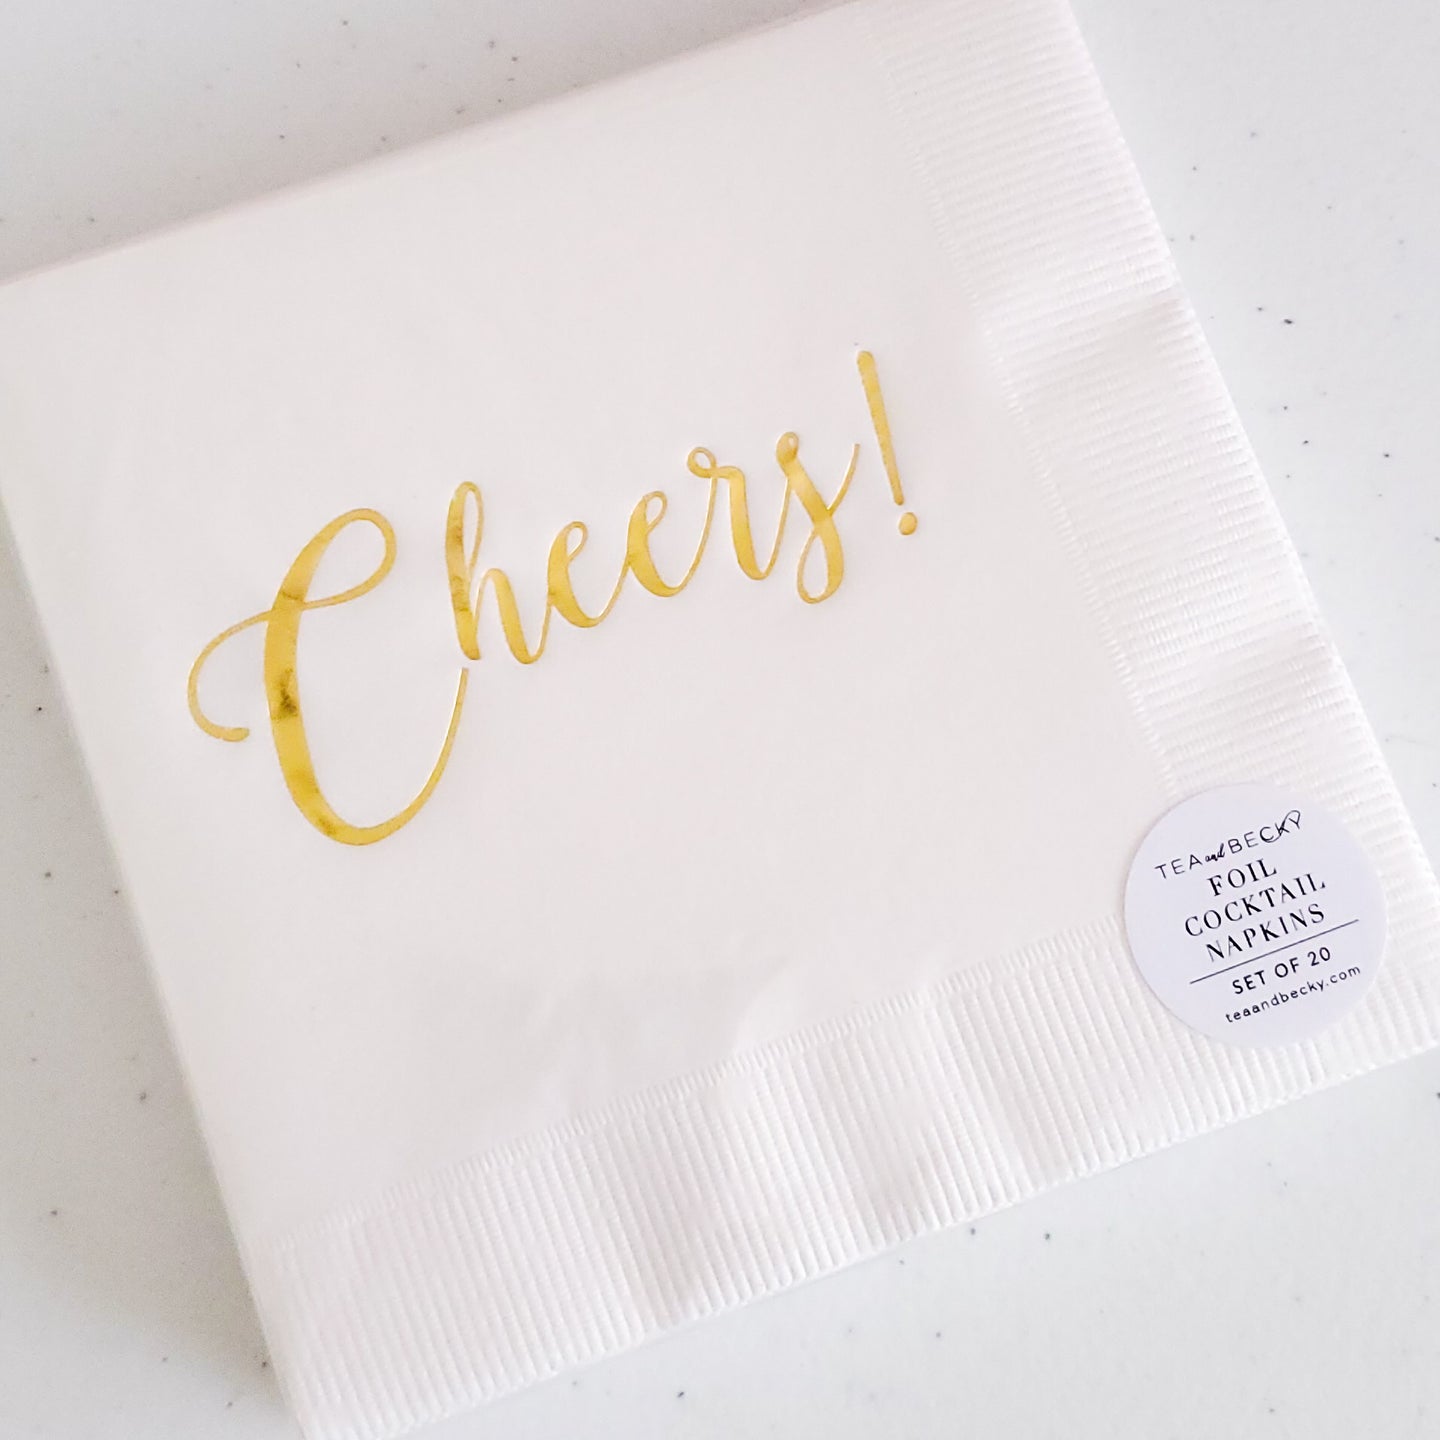 Cheers Napkins White and Gold - Set of 20